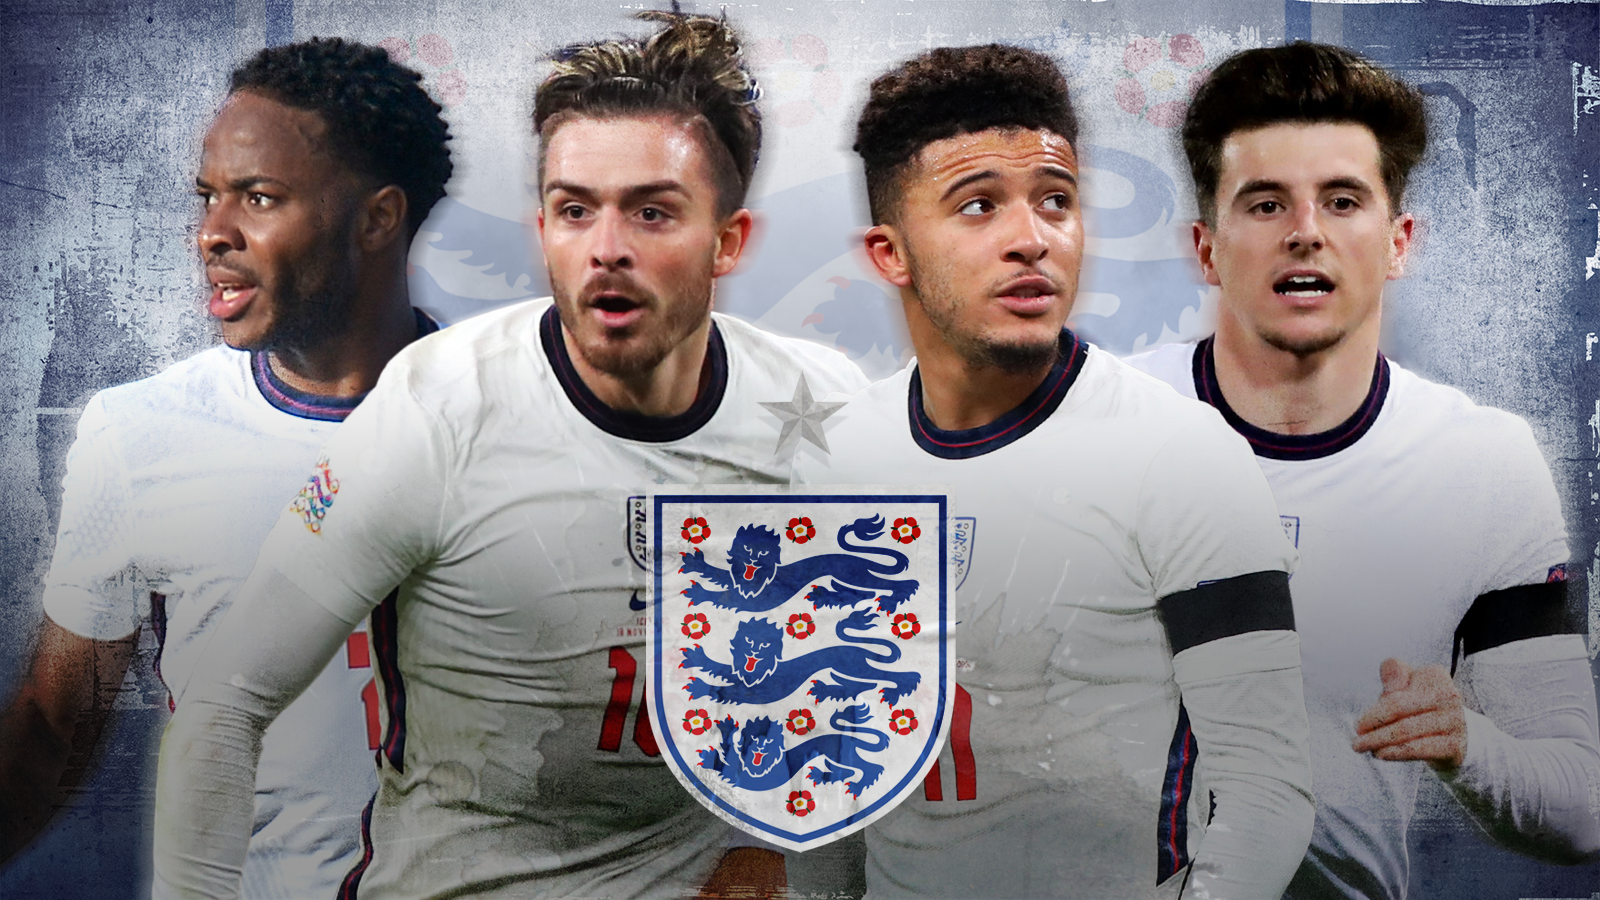 Euro 2020: Which players should be England's attacking options this summer?